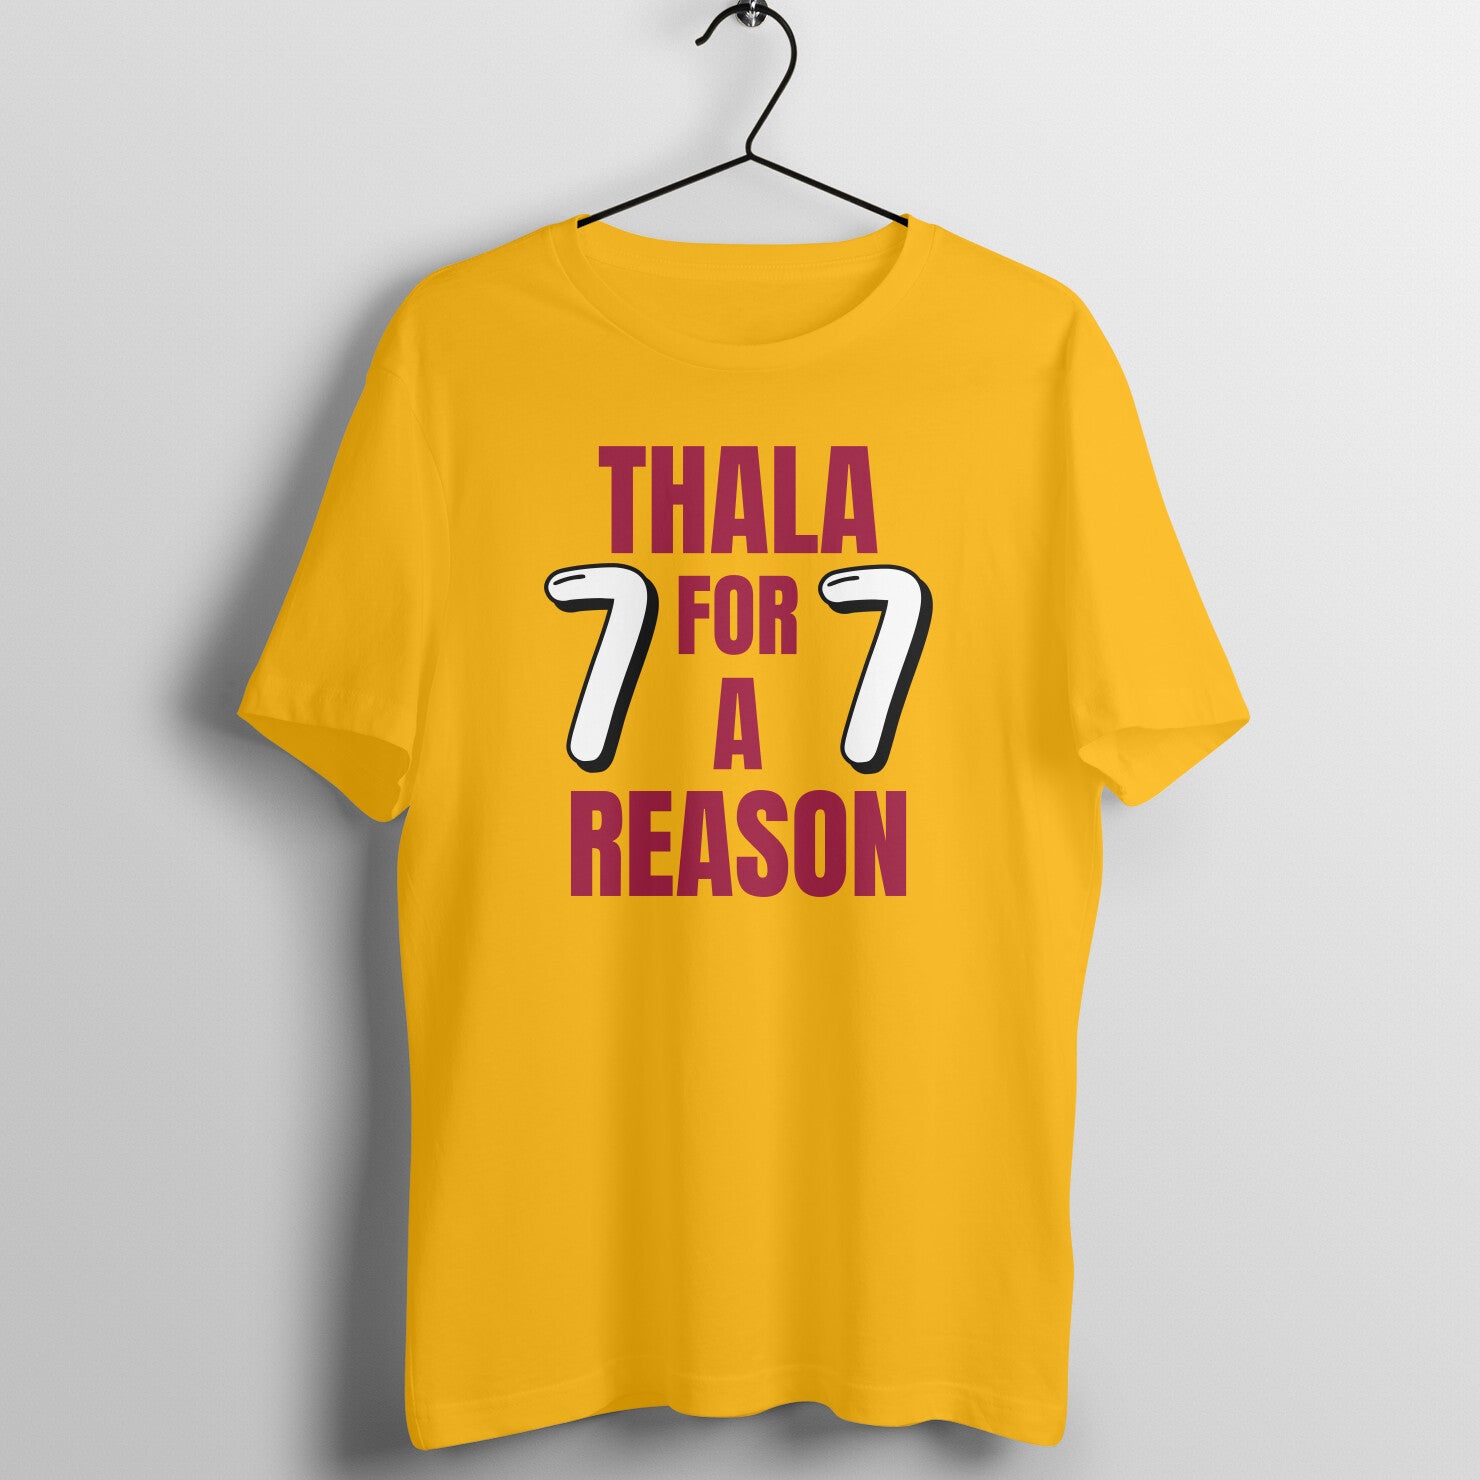 Seven Thala For a Reason Exclusive Yellow T Shirt for Men and Women